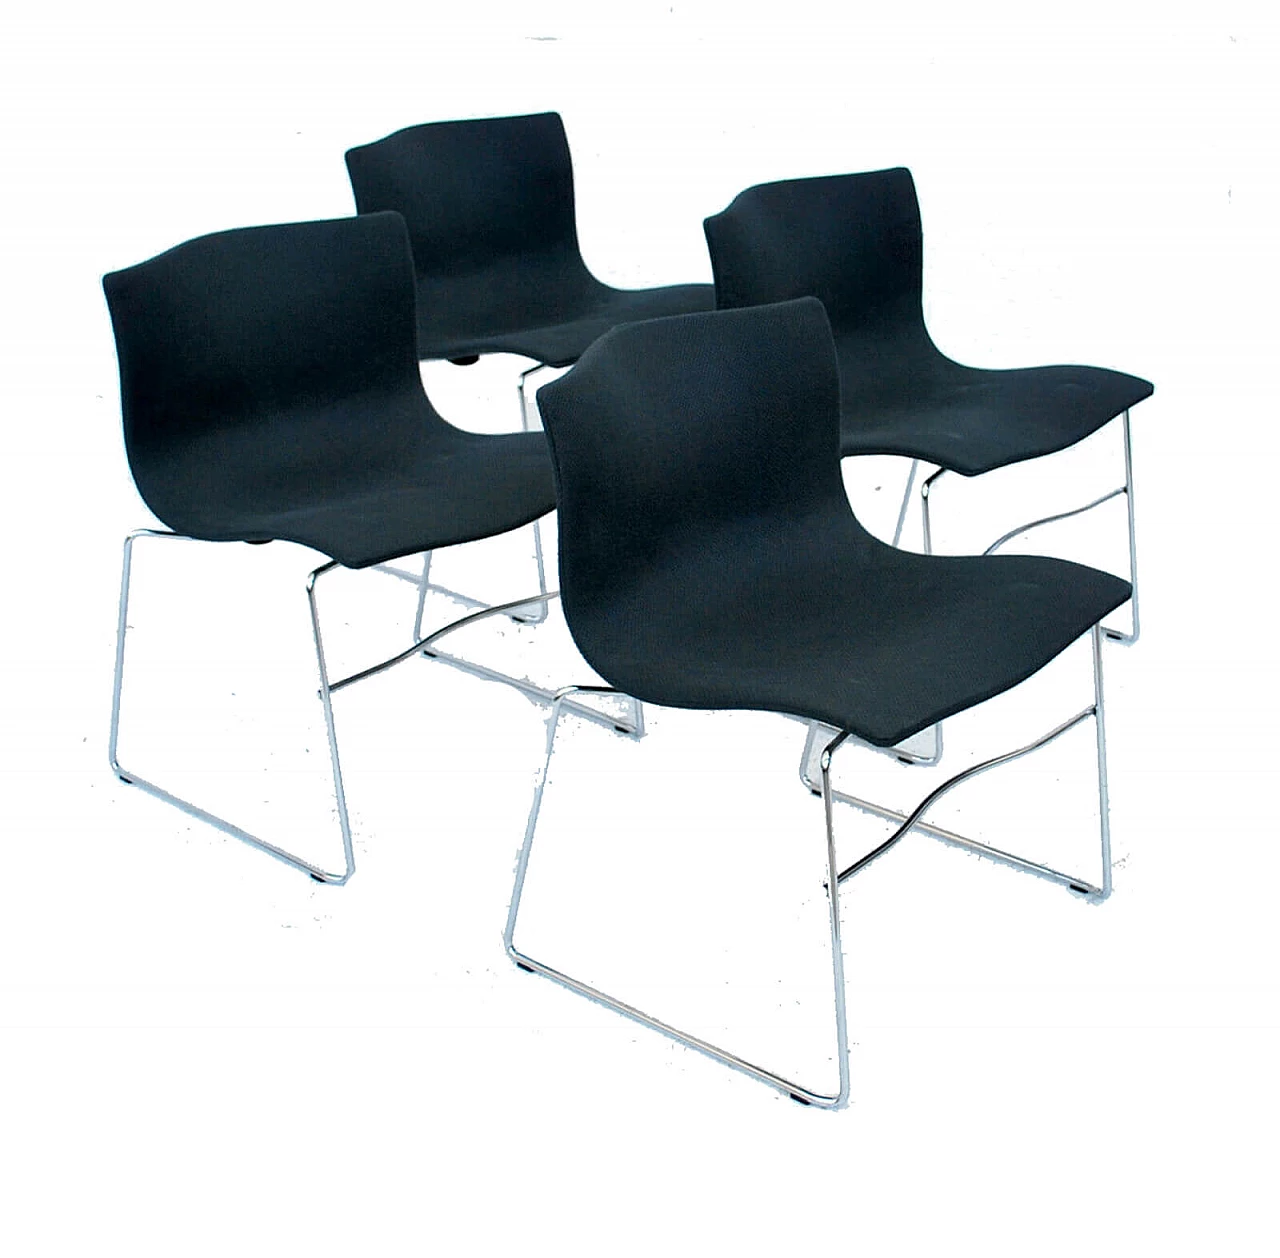 Handkerchief chairs by Massimo and Lella Vignelli for Knoll, 80s 1198448